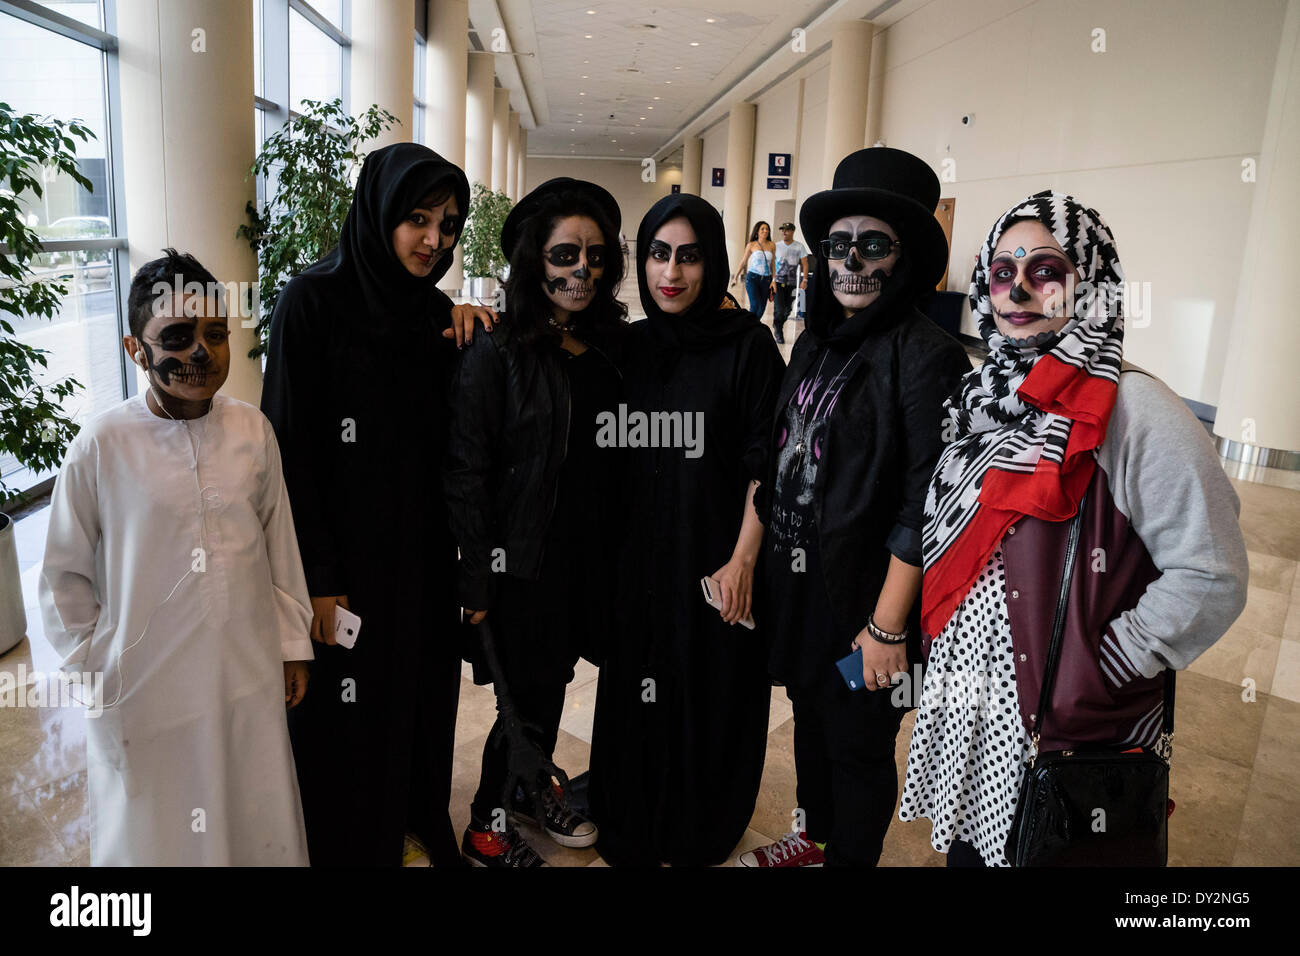 Dubai, 4th April 2014; Fans in costume at the 2014 Middle East Film and Comic Con at World Trade Centre in Dubai United Arab Emirates Credit:  Iain Masterton/Alamy Live News Stock Photo